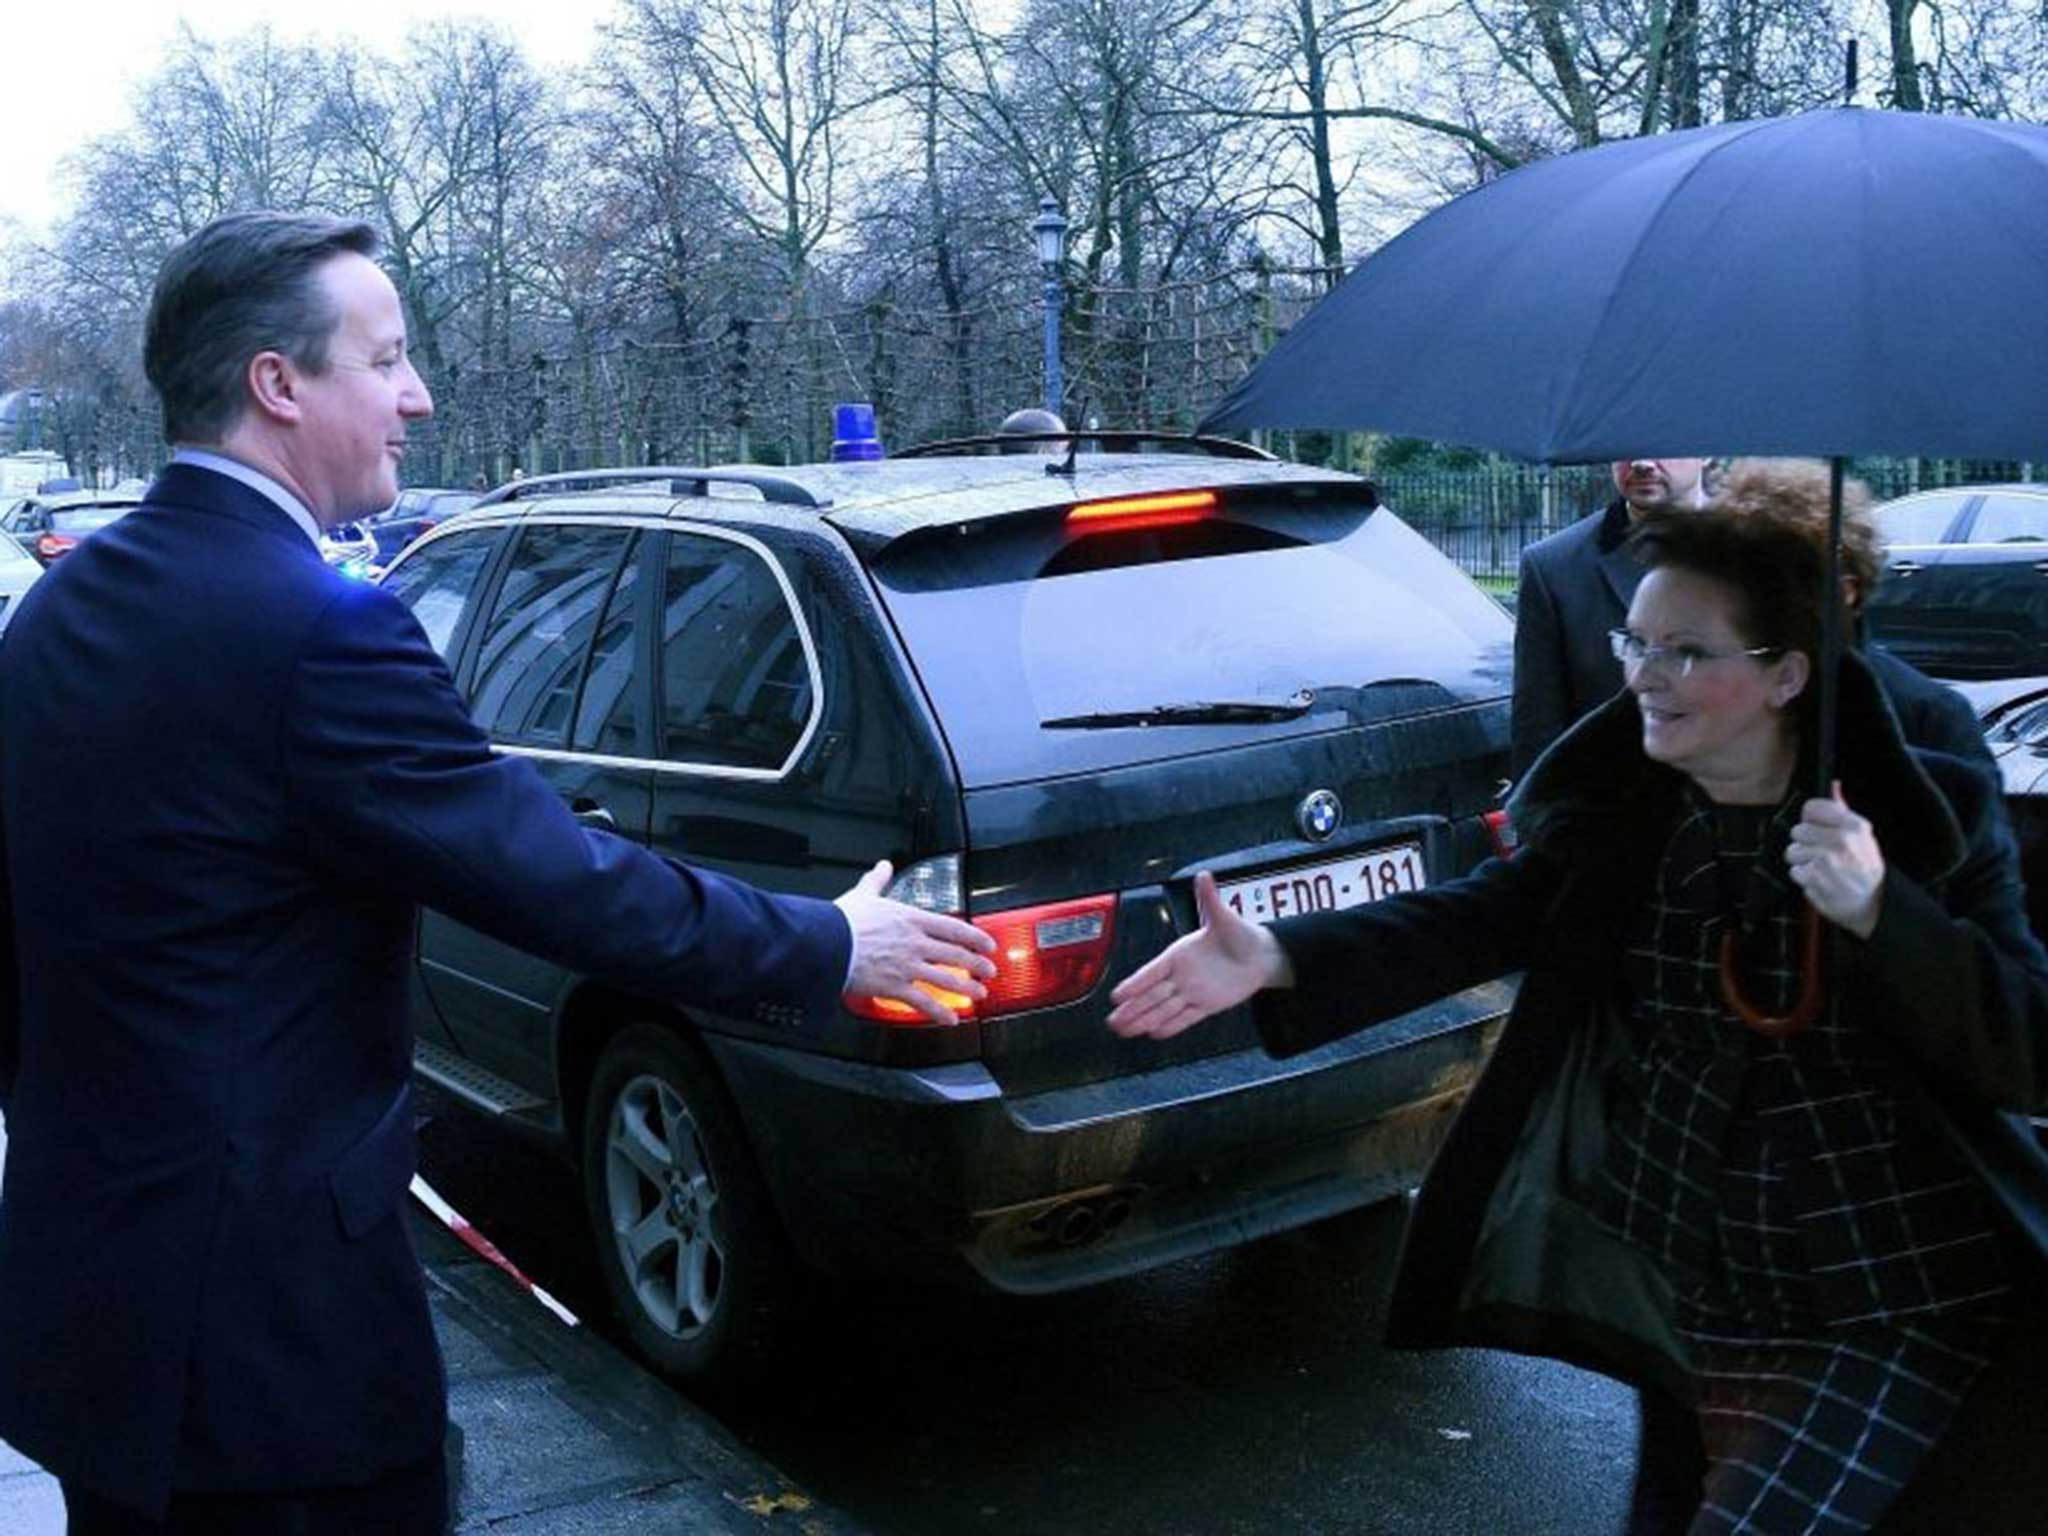 Polish Prime Minister Ewa Kopacz and Prime Minister David Cameron arrive for their meeting in Brussels